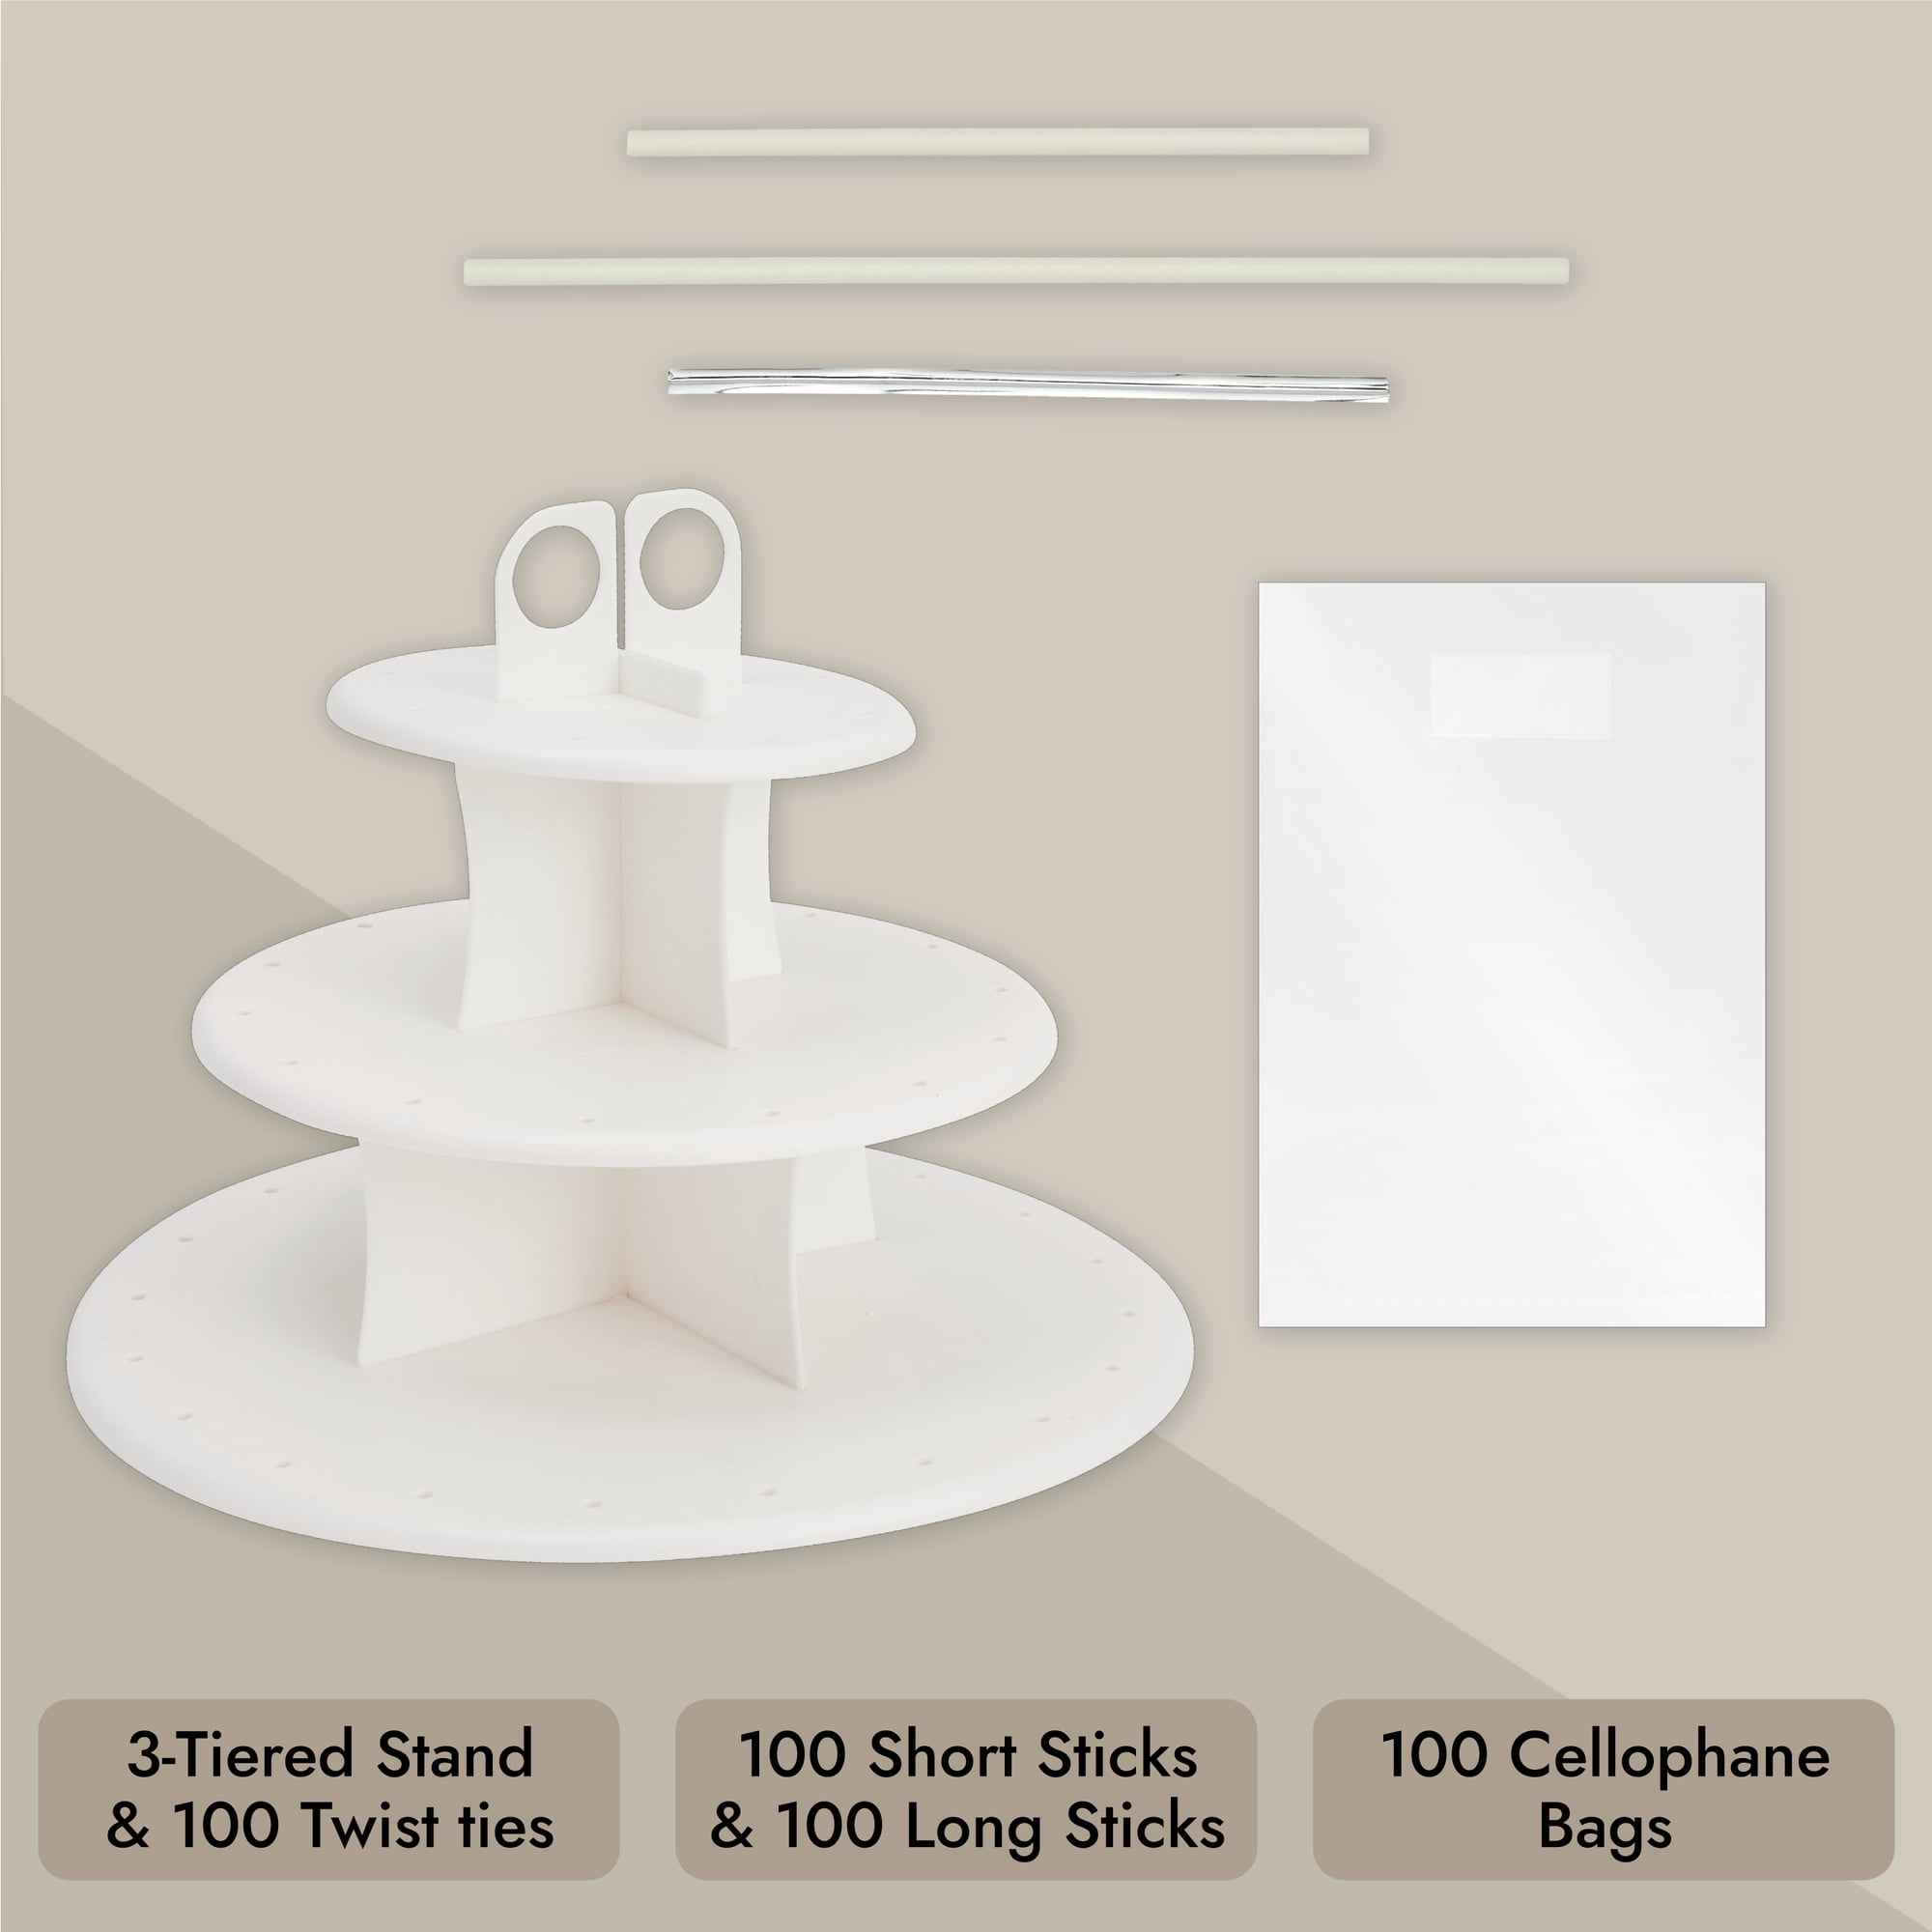 Silicone Cake Pop Mold Set - 2 Pack Lollipop Molds Kit with 40 Cake Pop  Sticks, 100 Candy Treat Bags, and 100 Gold Twist Ties, Great For Chocolate